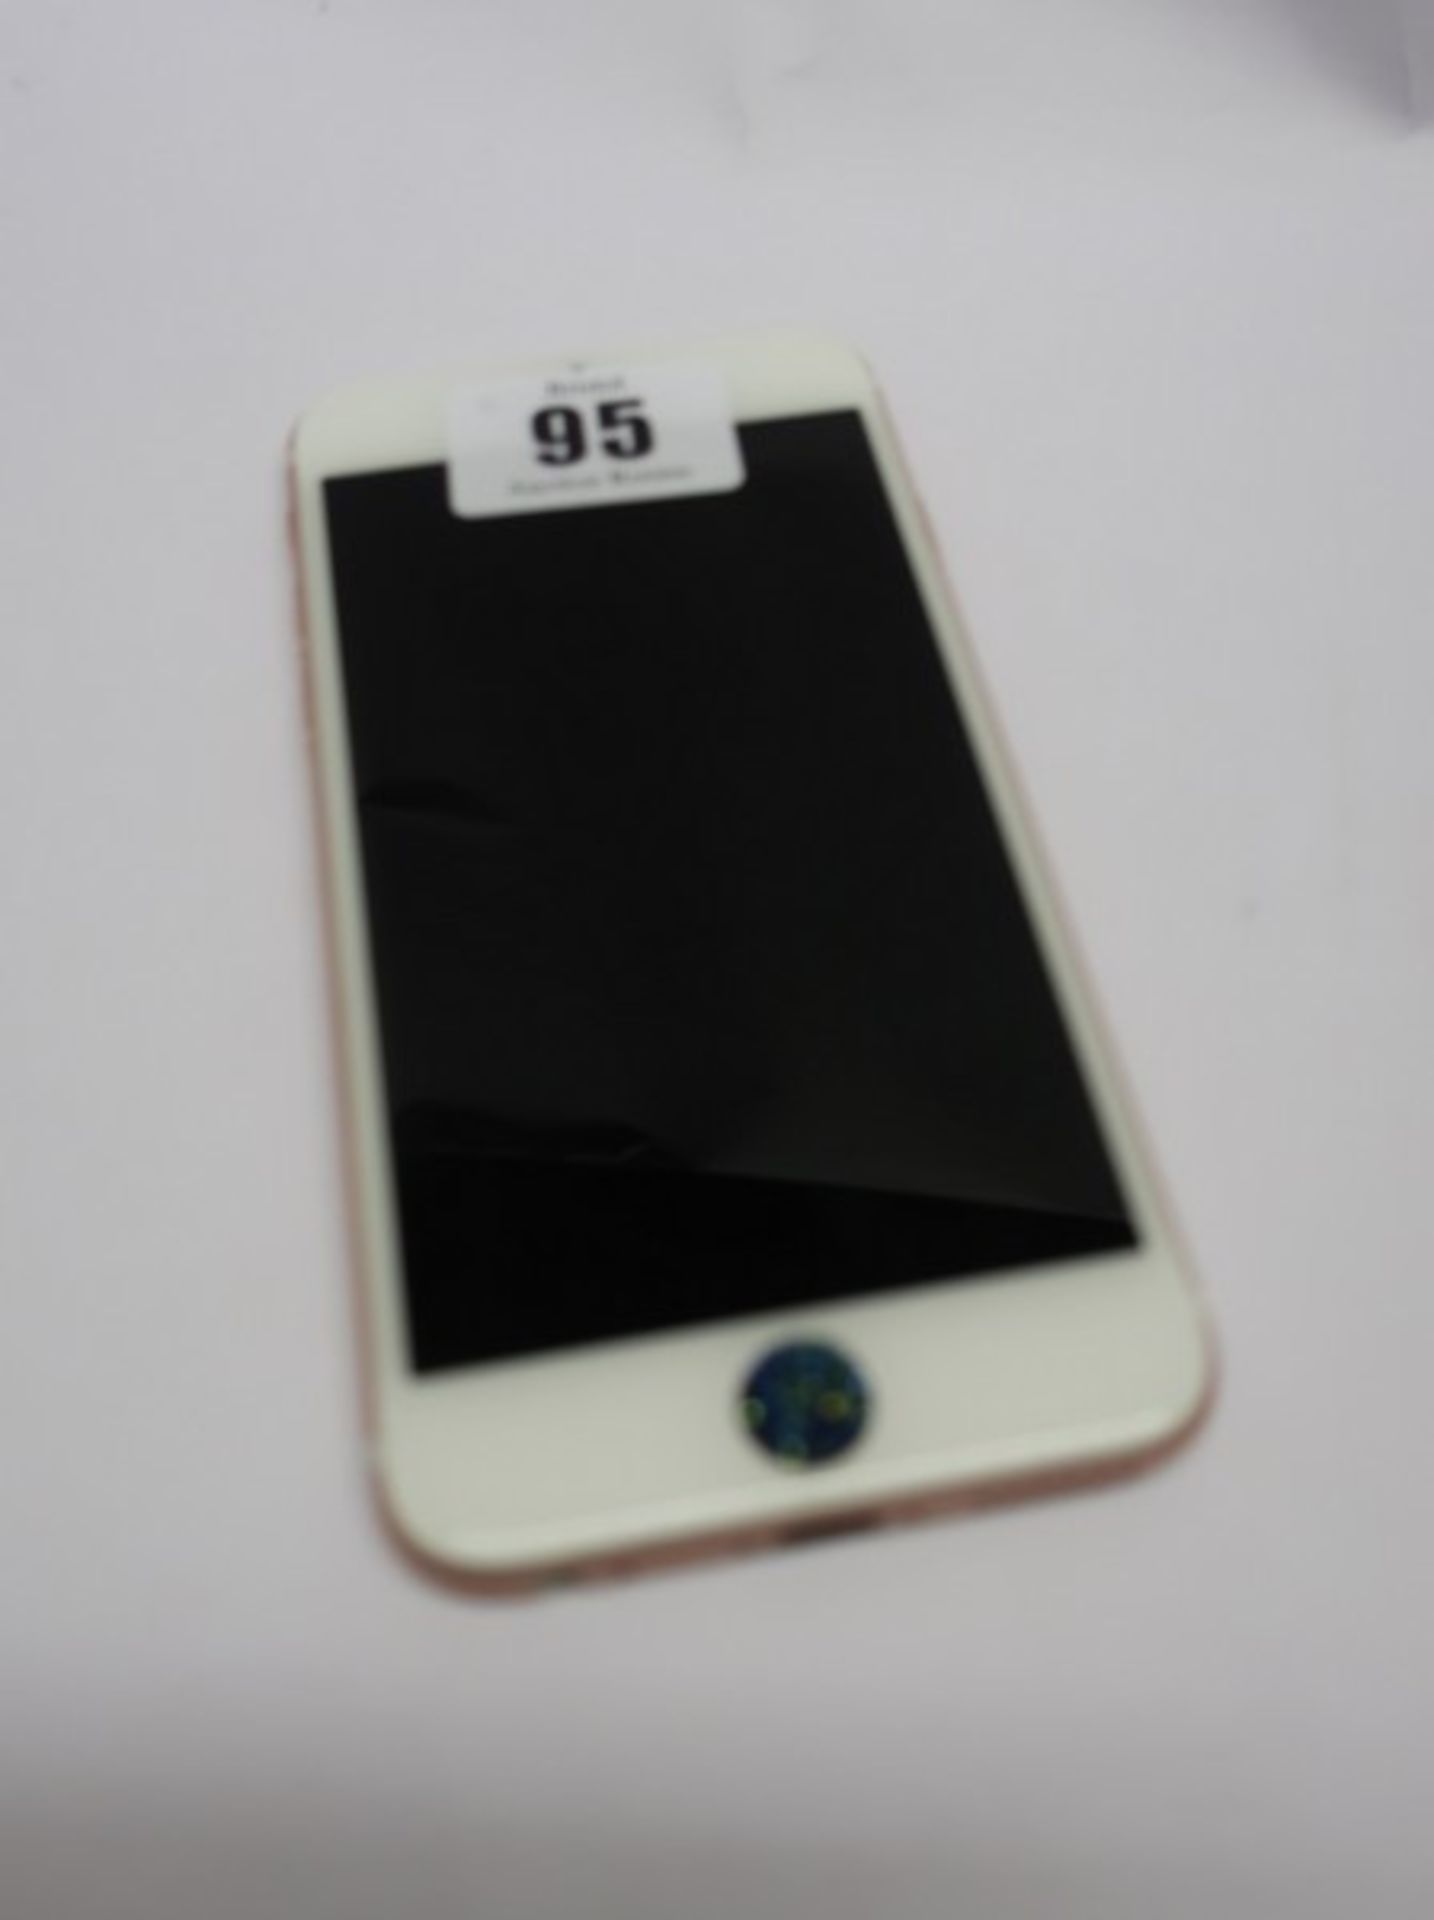 An Apple iPhone 6S 128GB model A1688 (IMEI: 355396088749430) (Activation locked, modified home